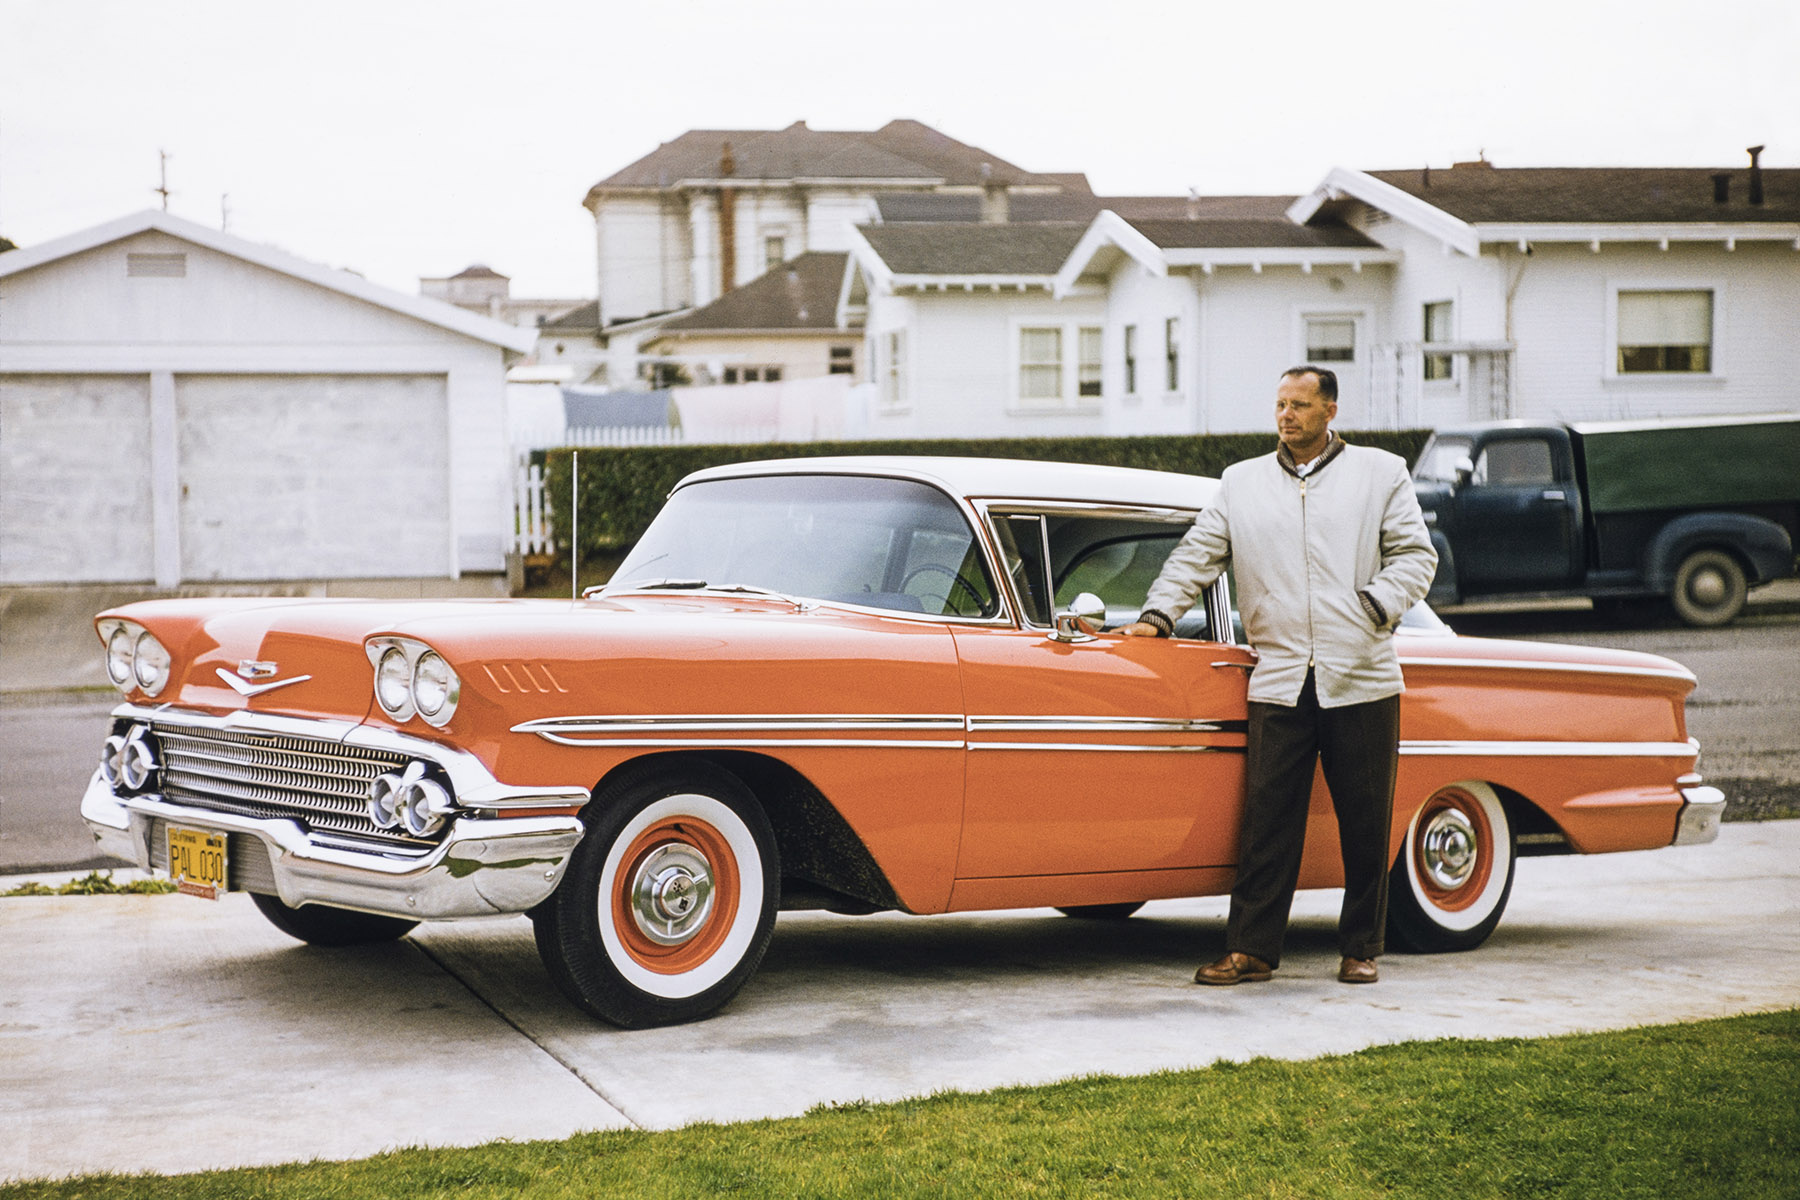 What were cars like in the 1950s